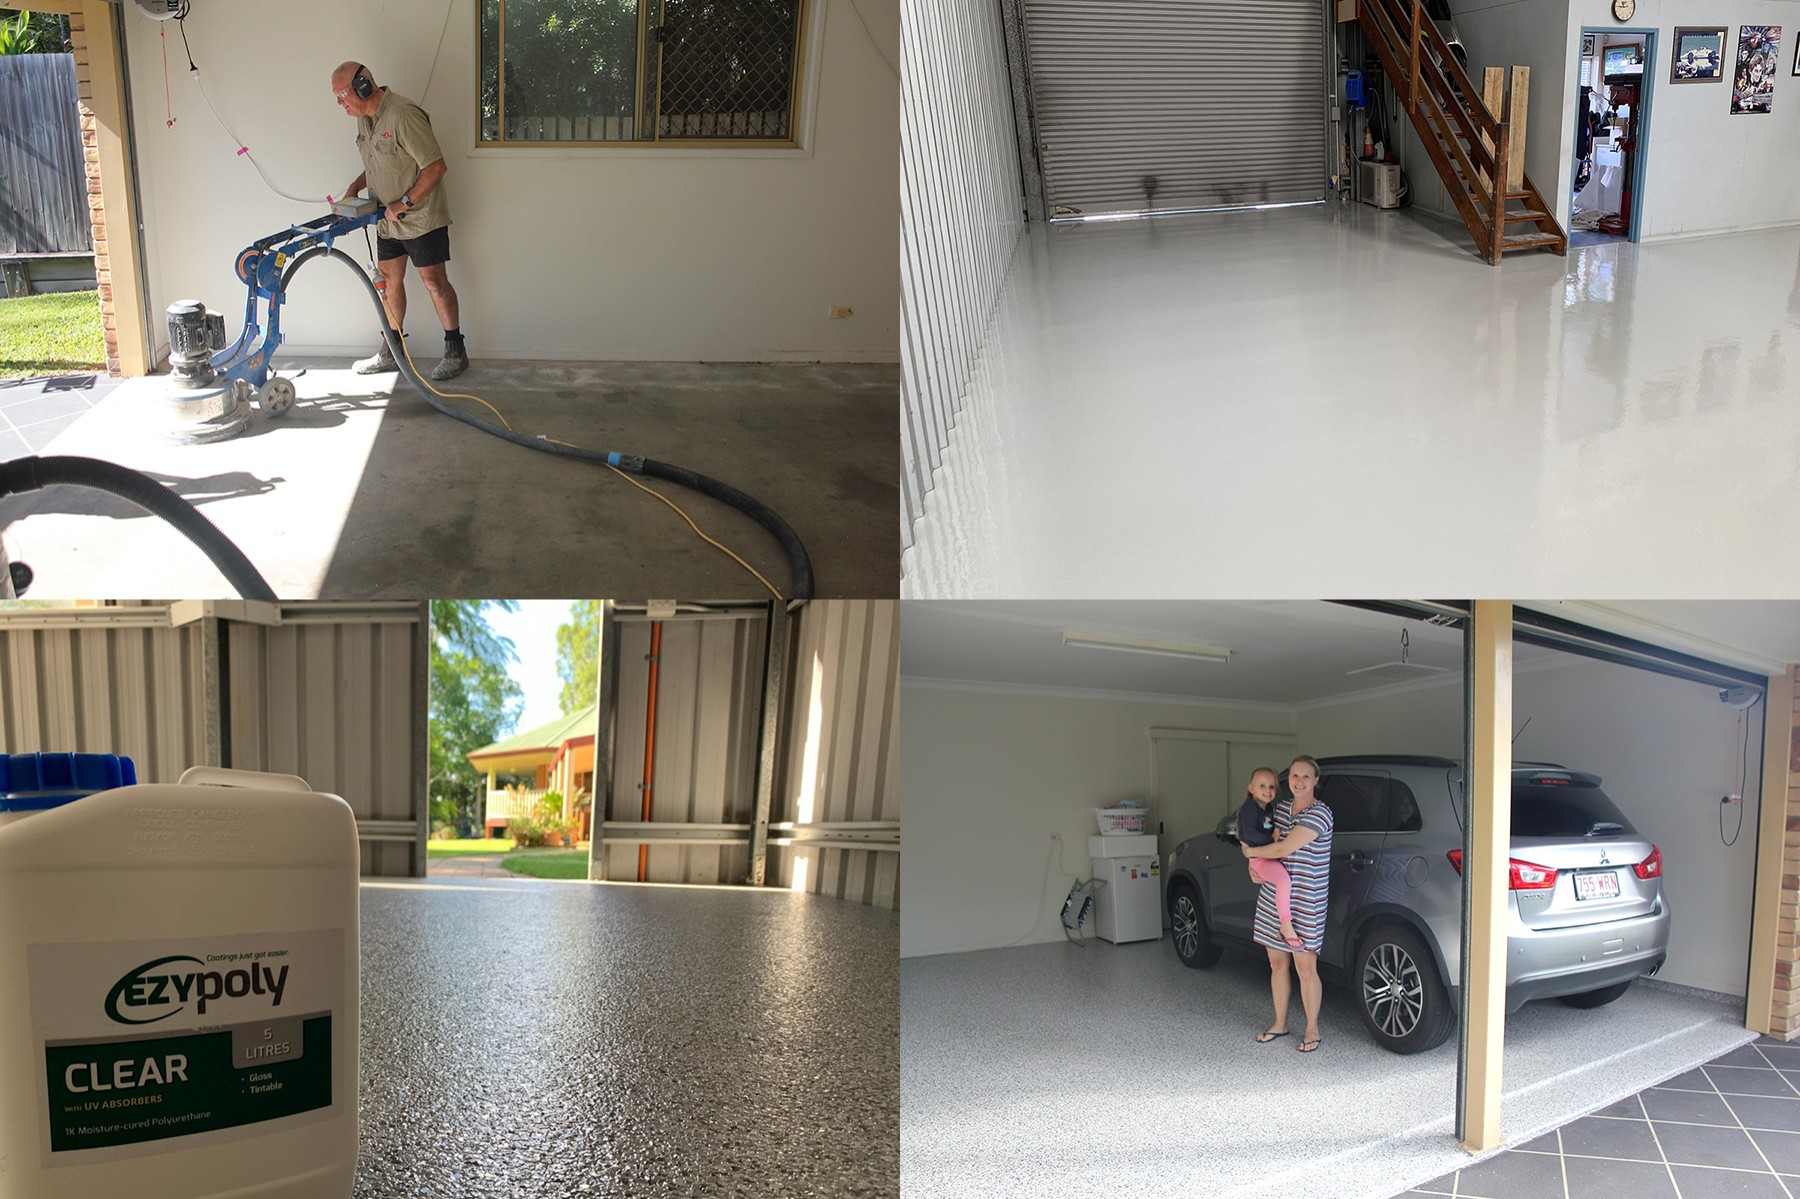 A composite image showing an epoxy flooring business owner working and some finished floors that are typical of this type of business.